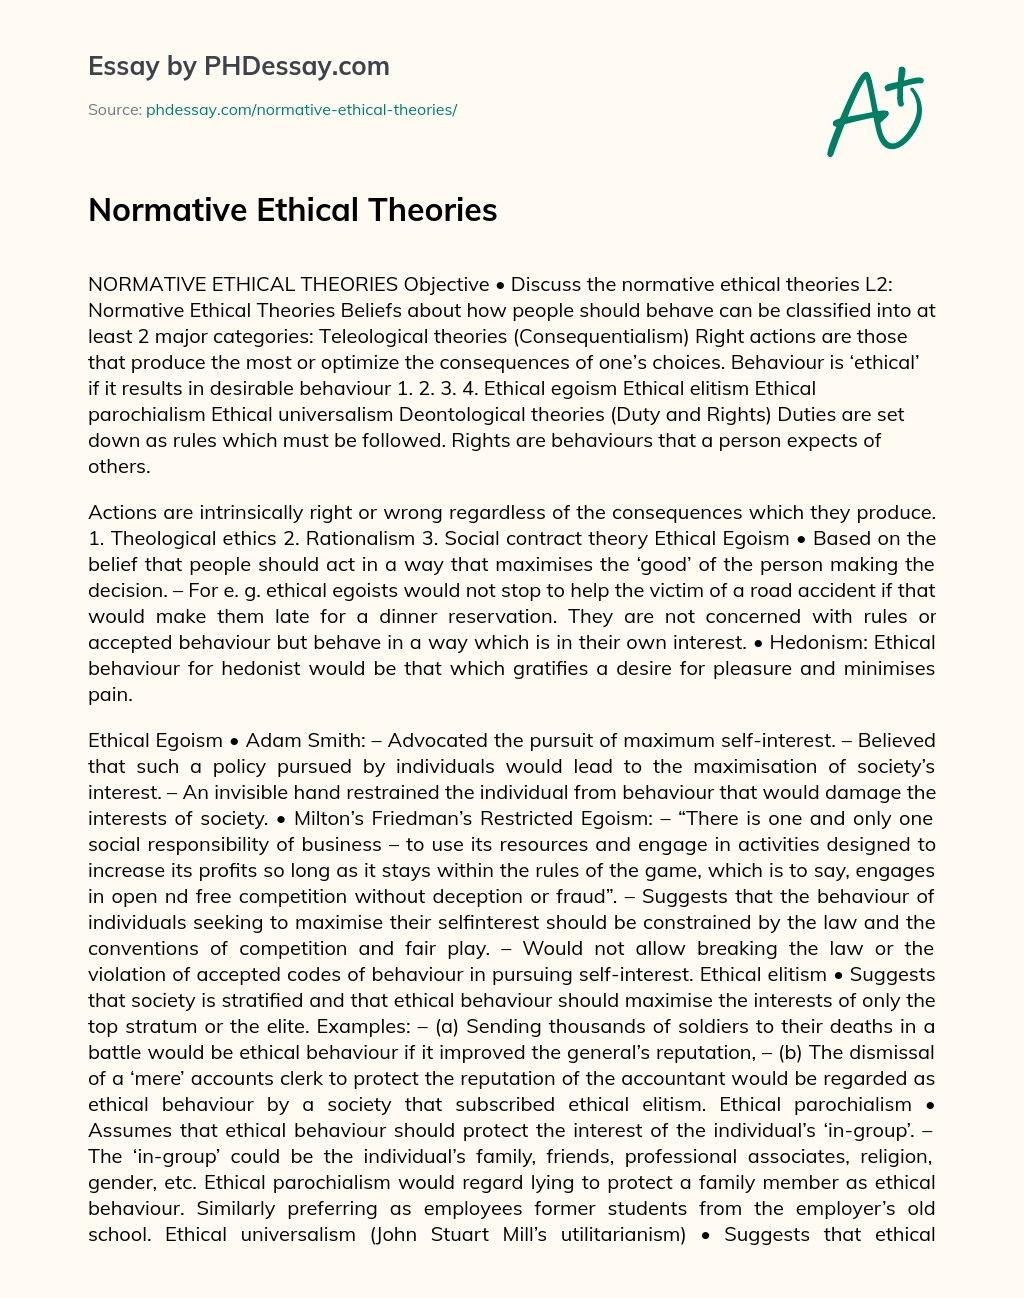 Normative Ethical Theories essay